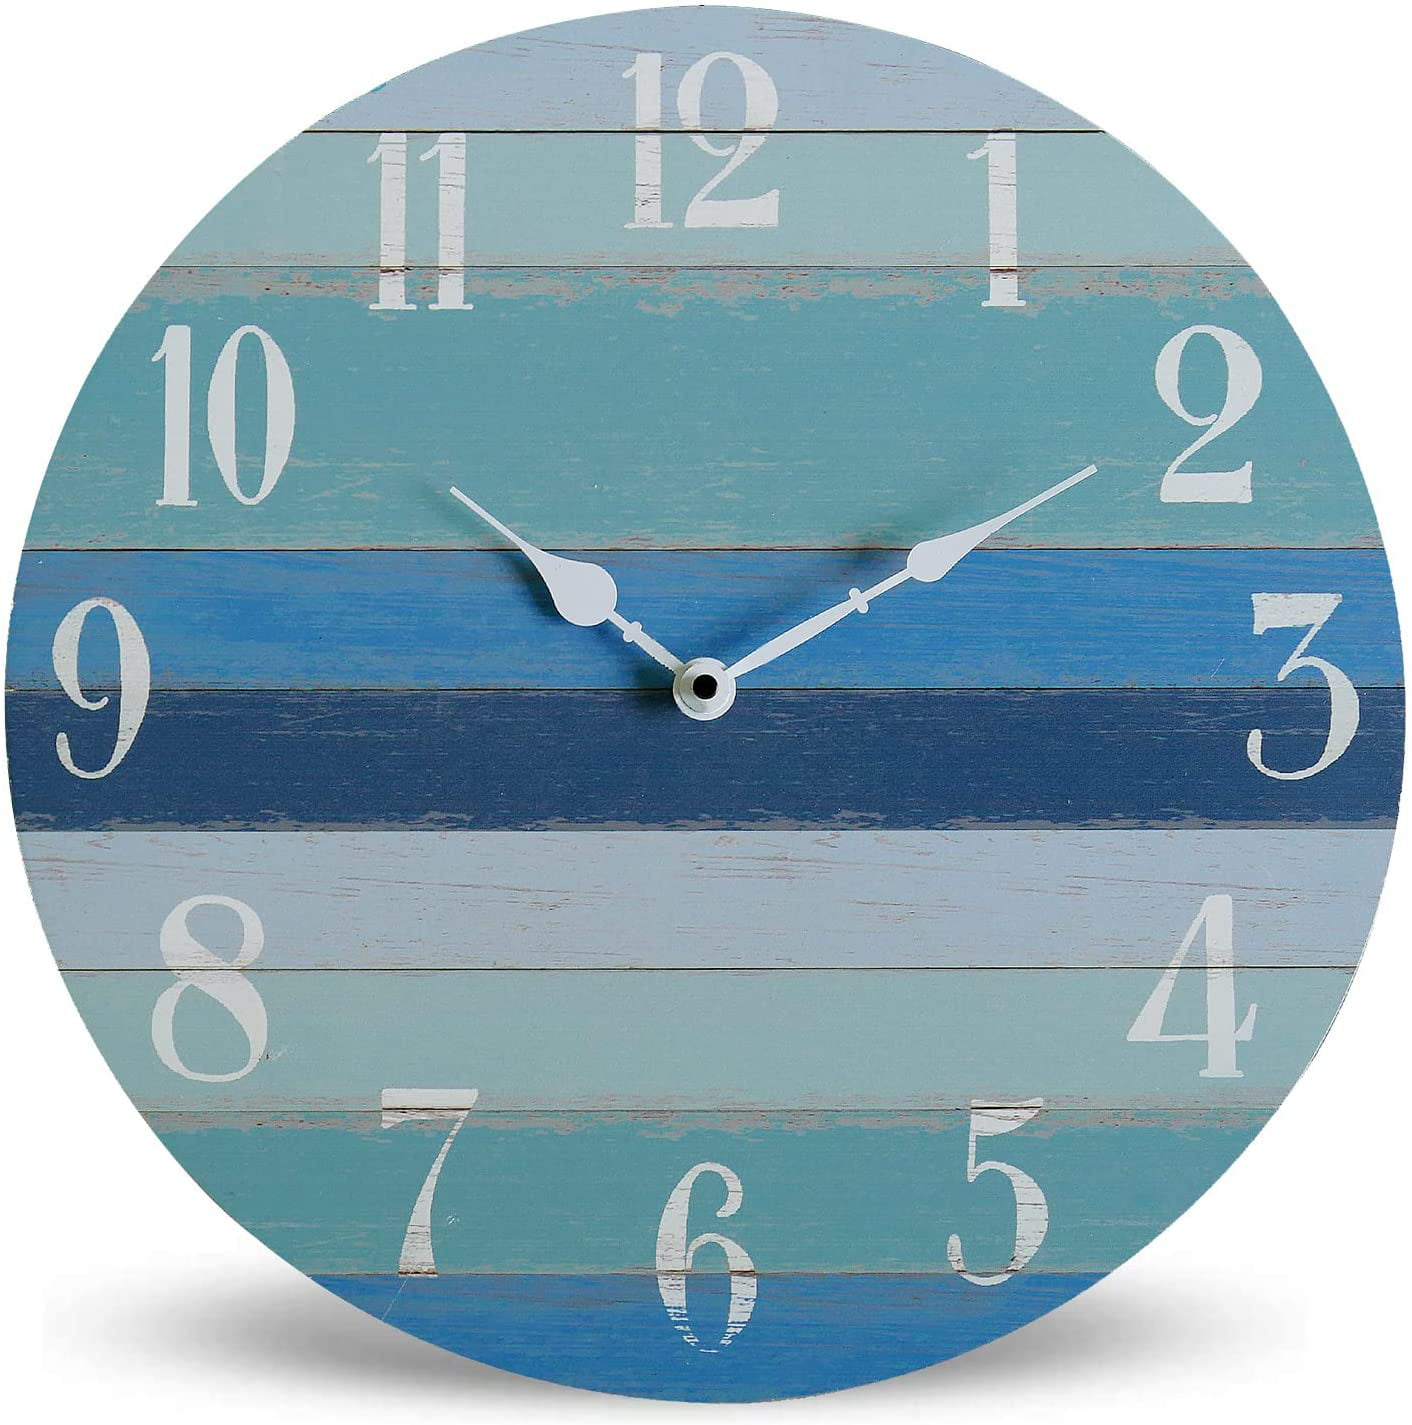 Vintage Rustic Beach Wall Clock 12" Round Silent Non Ticking Large Numbers BLUE 